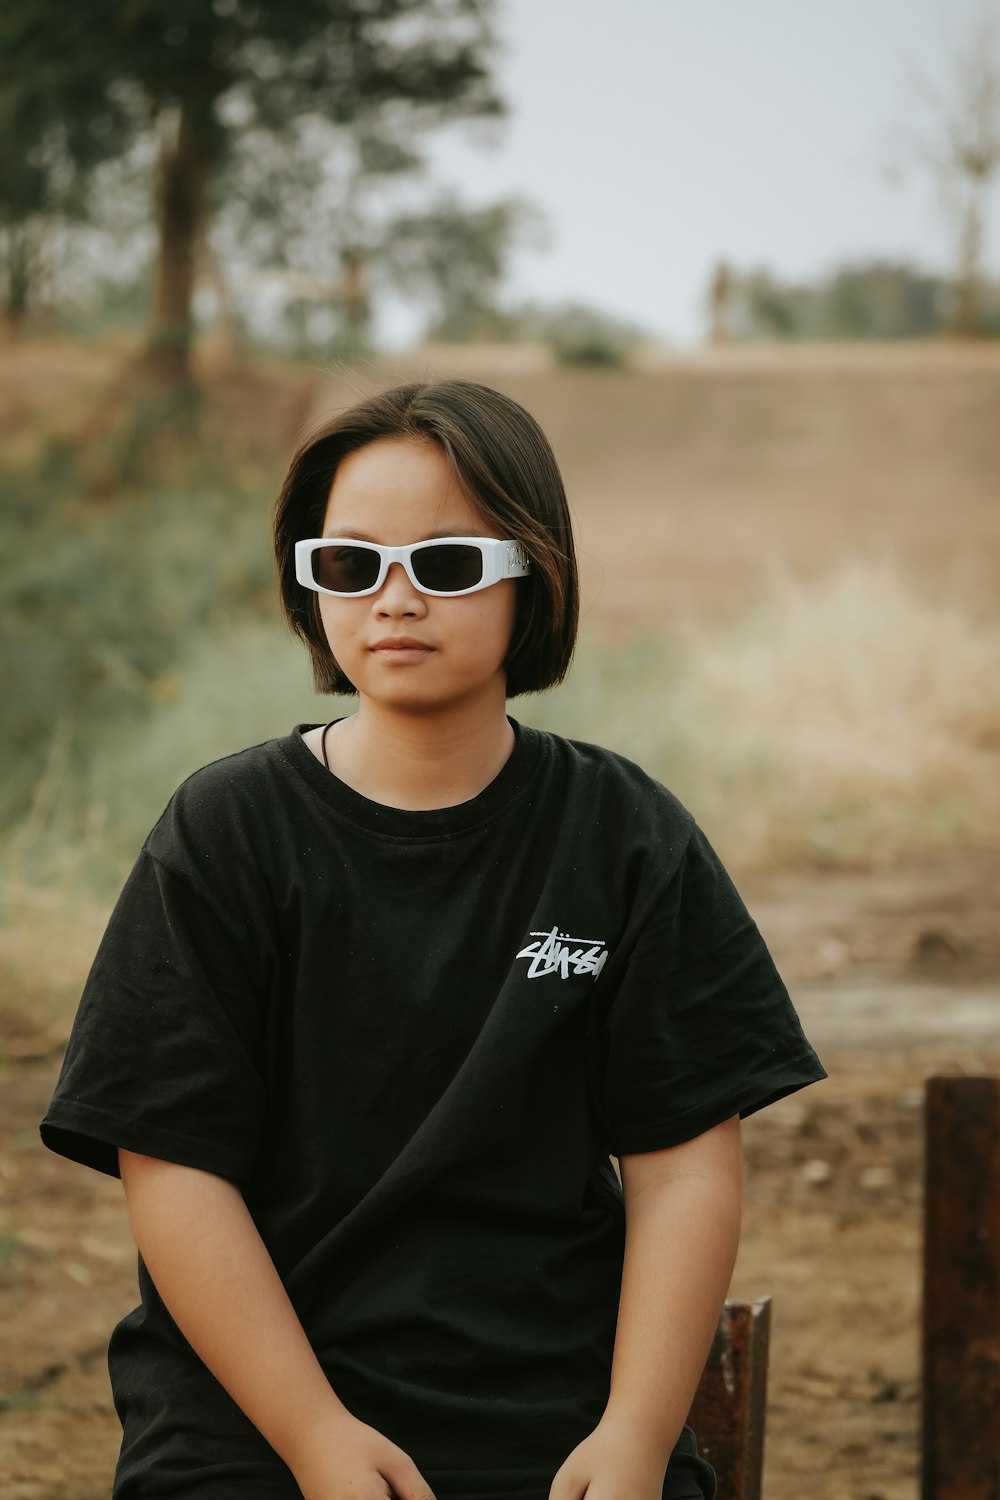 a girl wearing sunglasses sitting on a bench